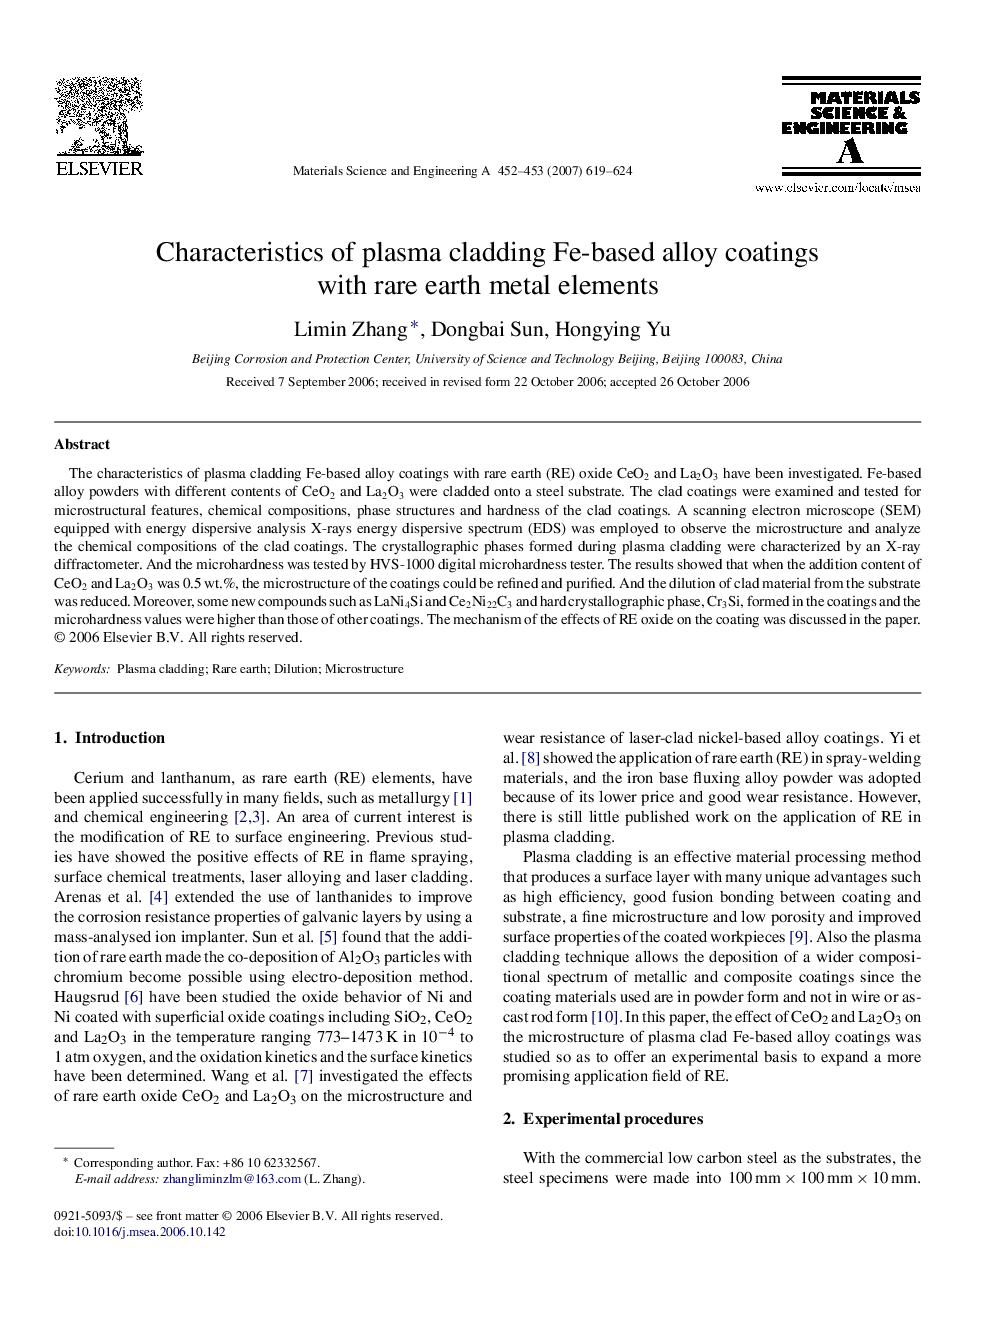 Characteristics of plasma cladding Fe-based alloy coatings with rare earth metal elements